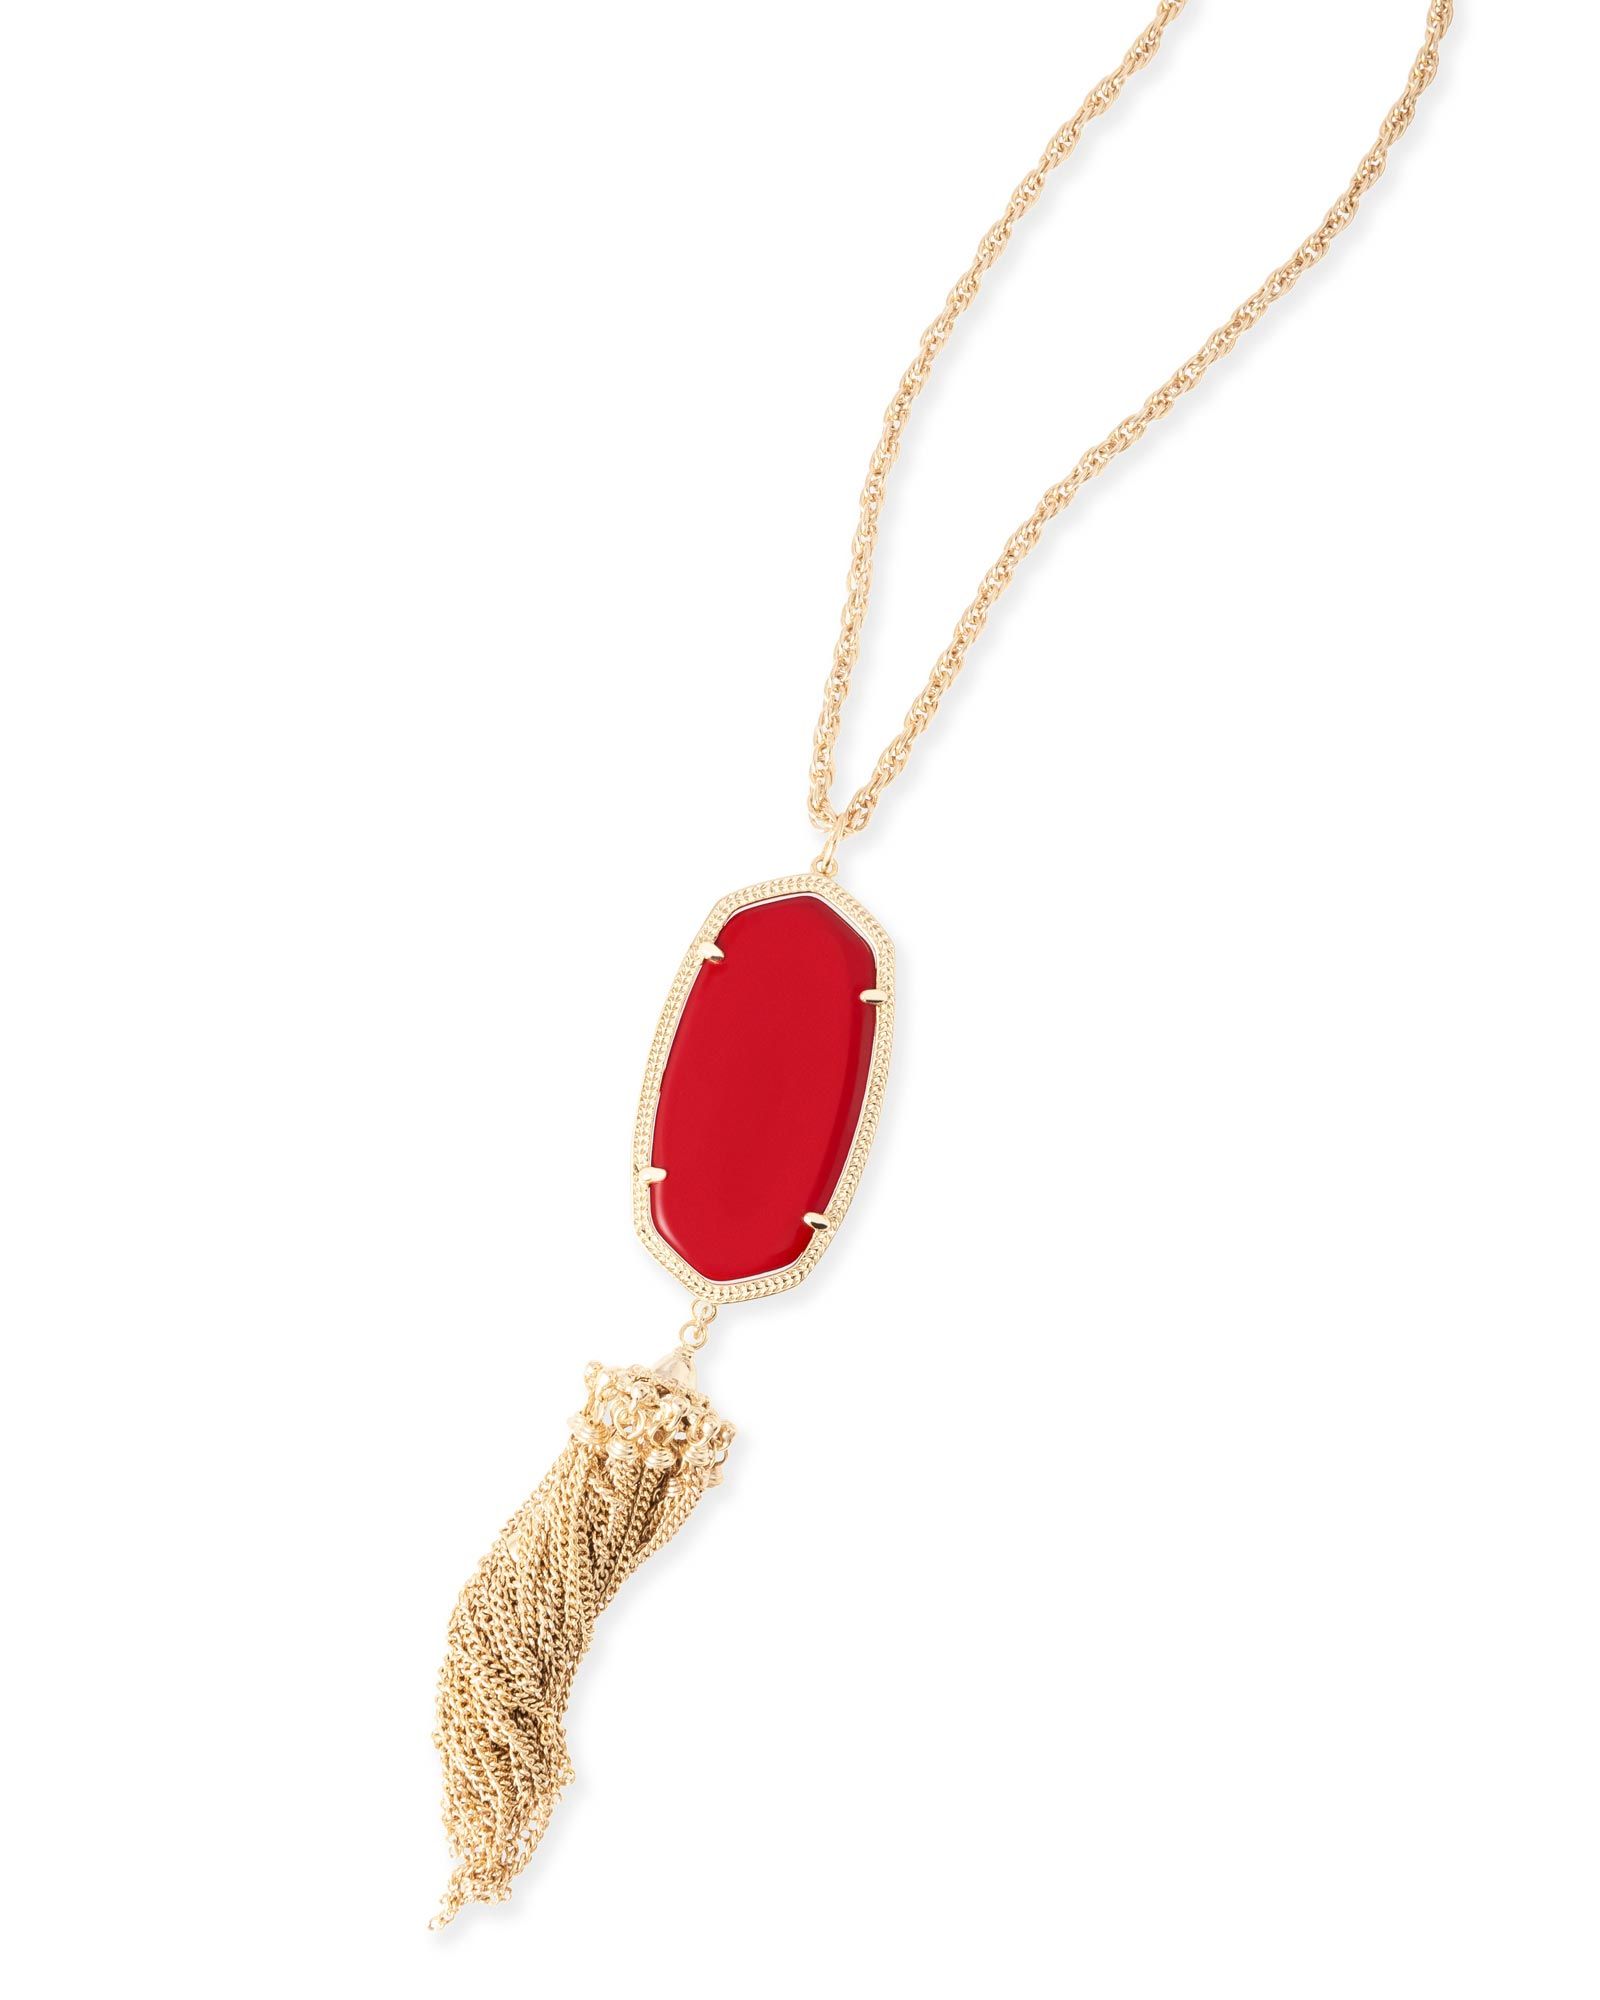 Rayne Necklace in Bright Red | Kendra Scott